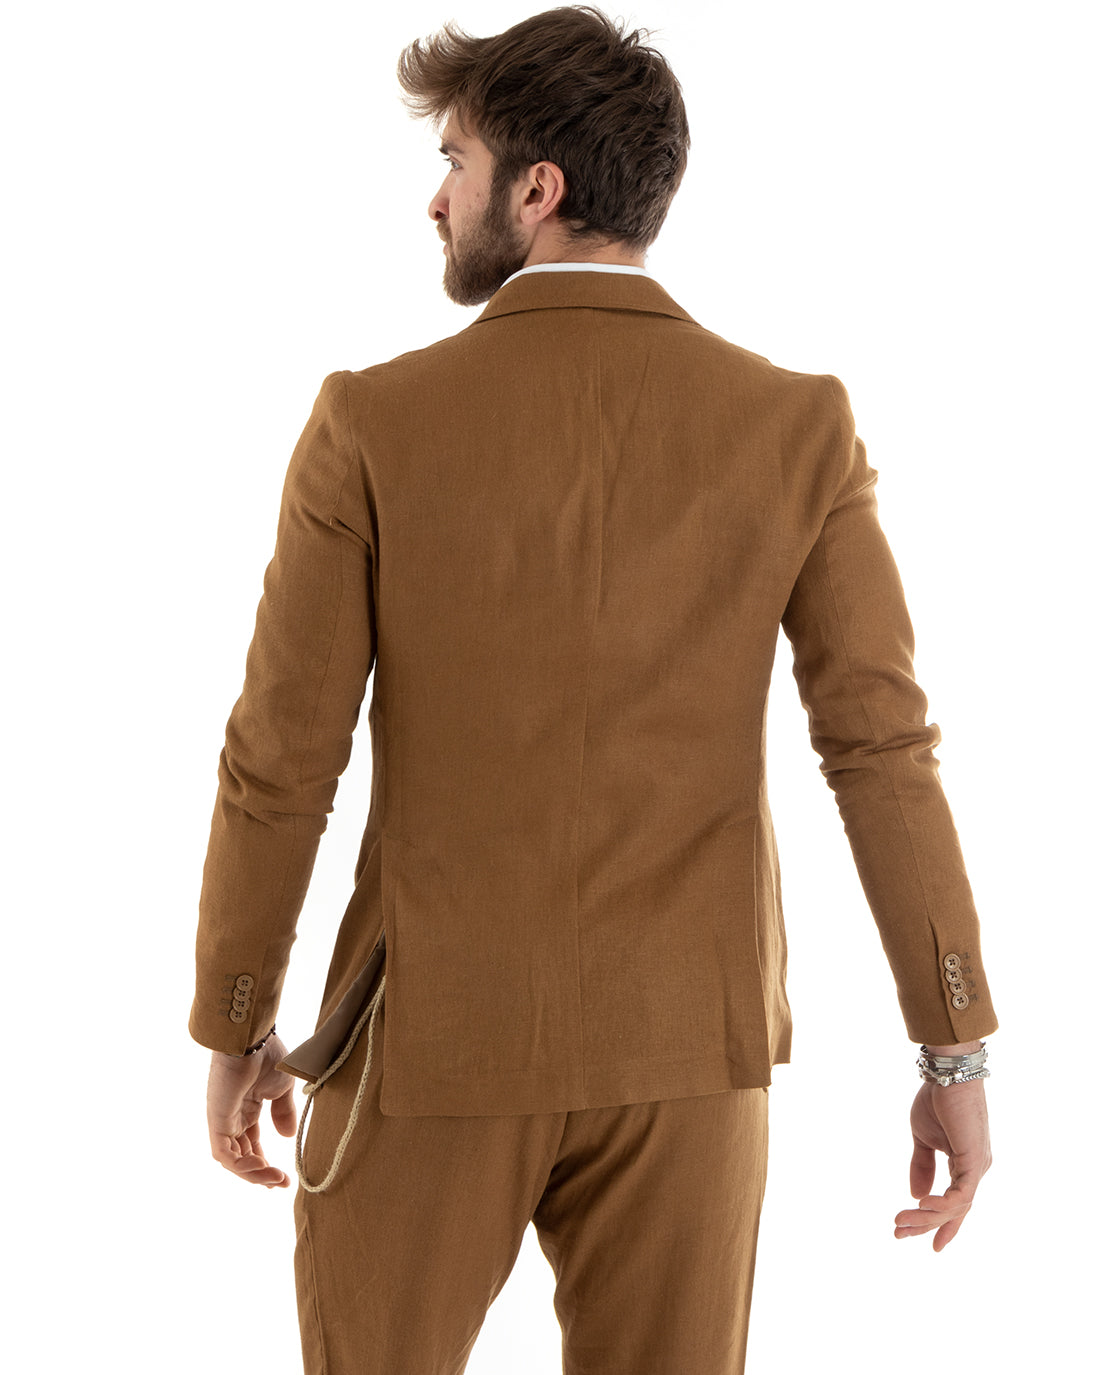 Double-breasted men's suit, tailored linen suit, jacket and trousers in solid color Camel GIOSAL-OU2334A